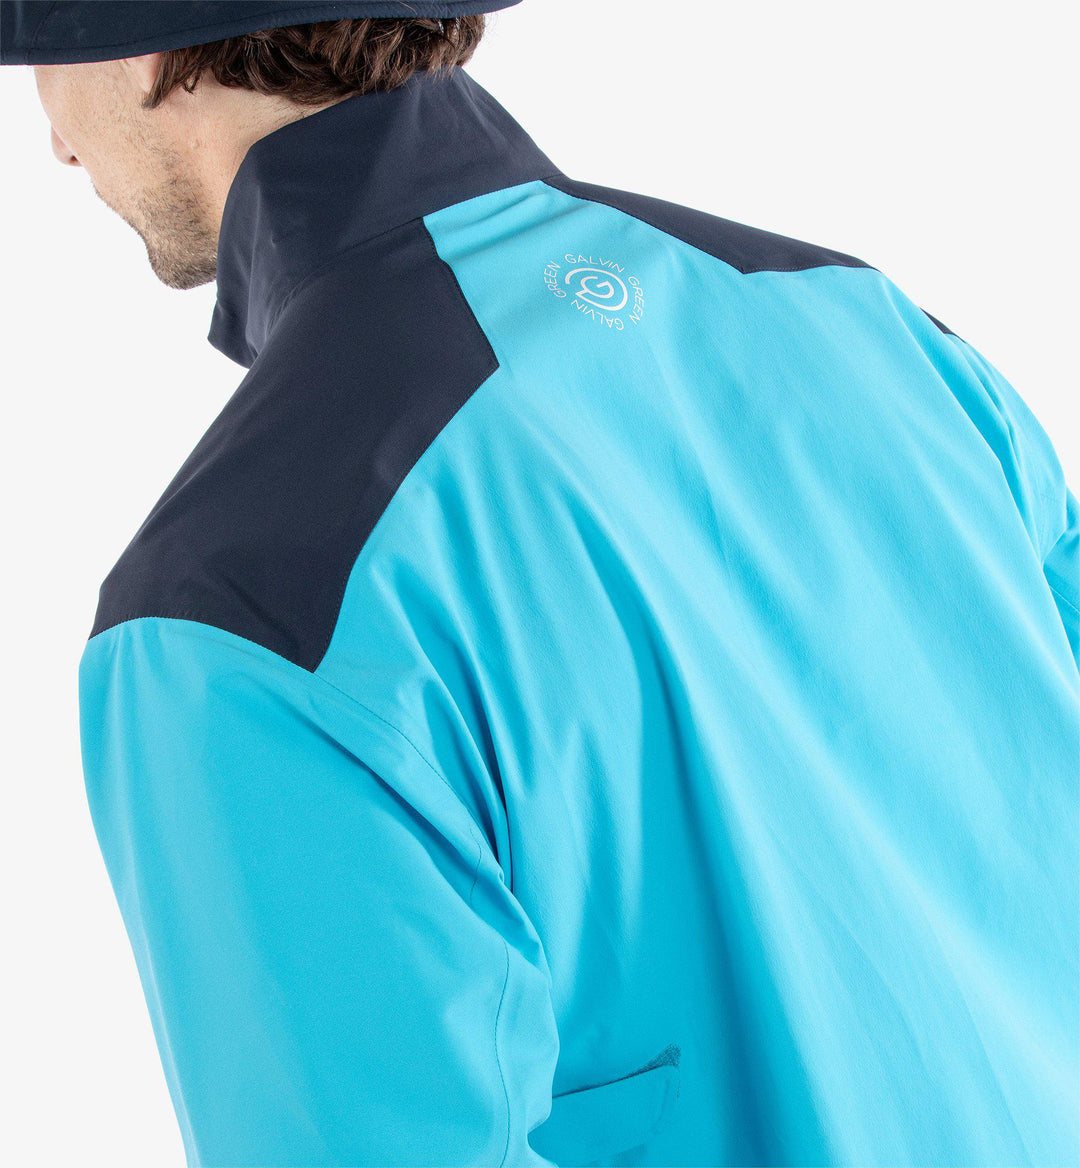 Ashford is a Waterproof golf jacket for Men in the color Aqua/Navy/White(6)